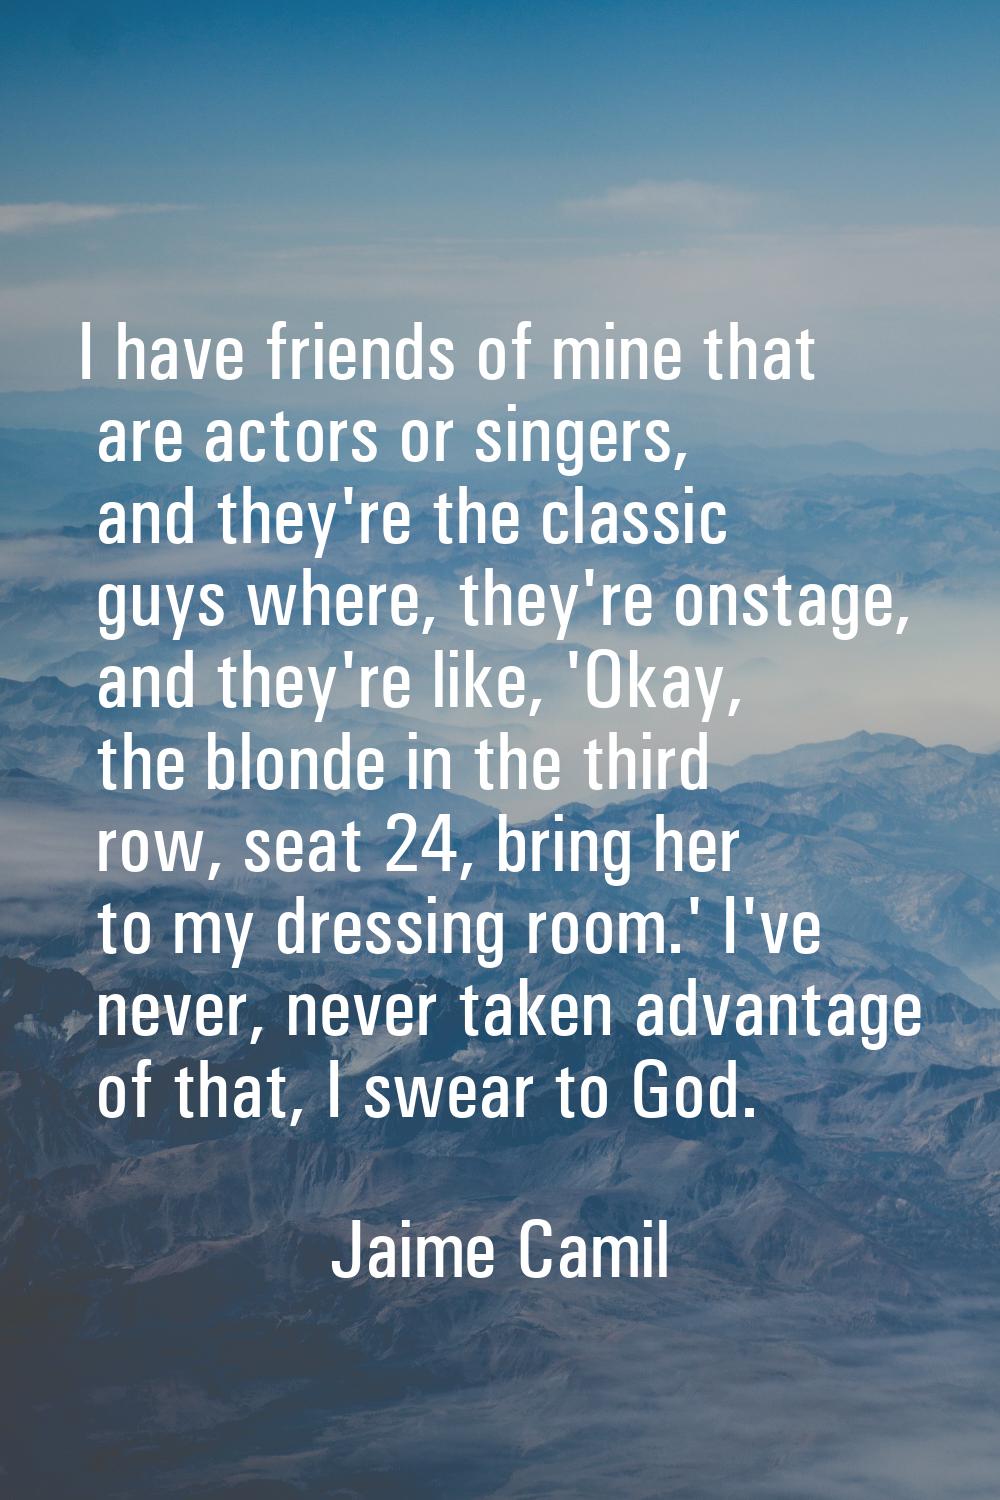 I have friends of mine that are actors or singers, and they're the classic guys where, they're onst